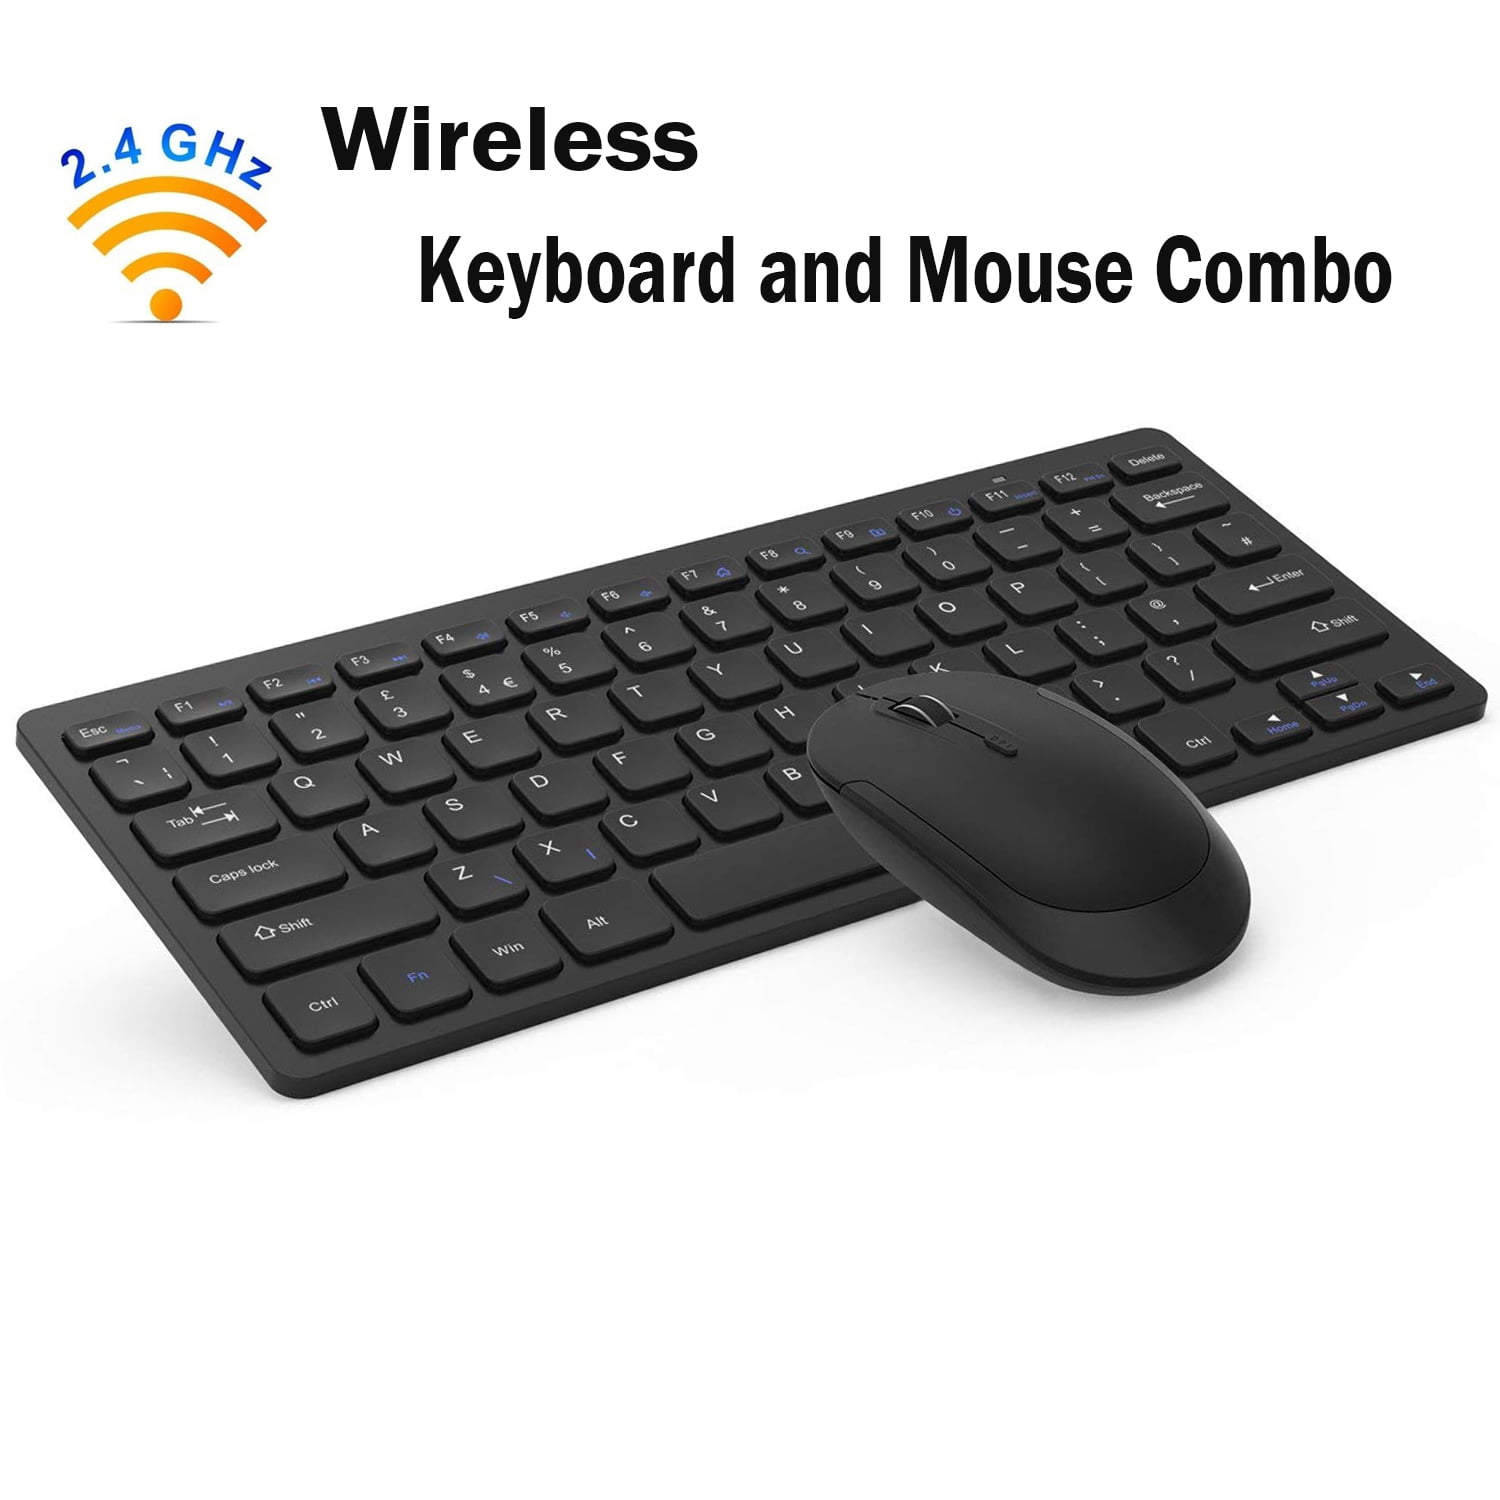 Slim Wireless Keyboard and Cordless Optical Mouse Set for PC Laptop Win7 8 WT UK 